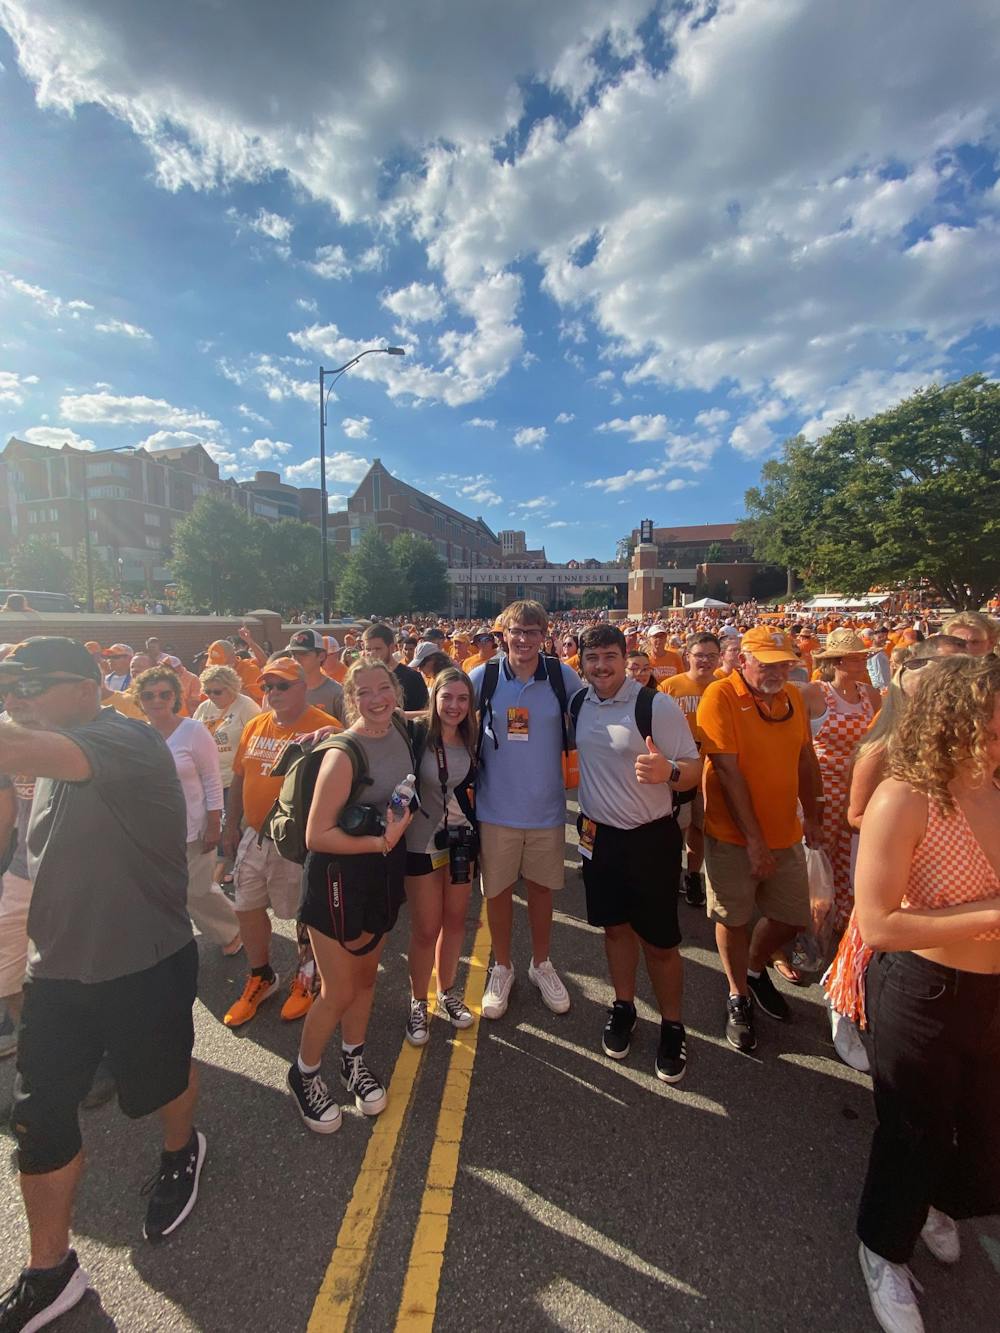 Knoxville, Tennessee: From our perspective